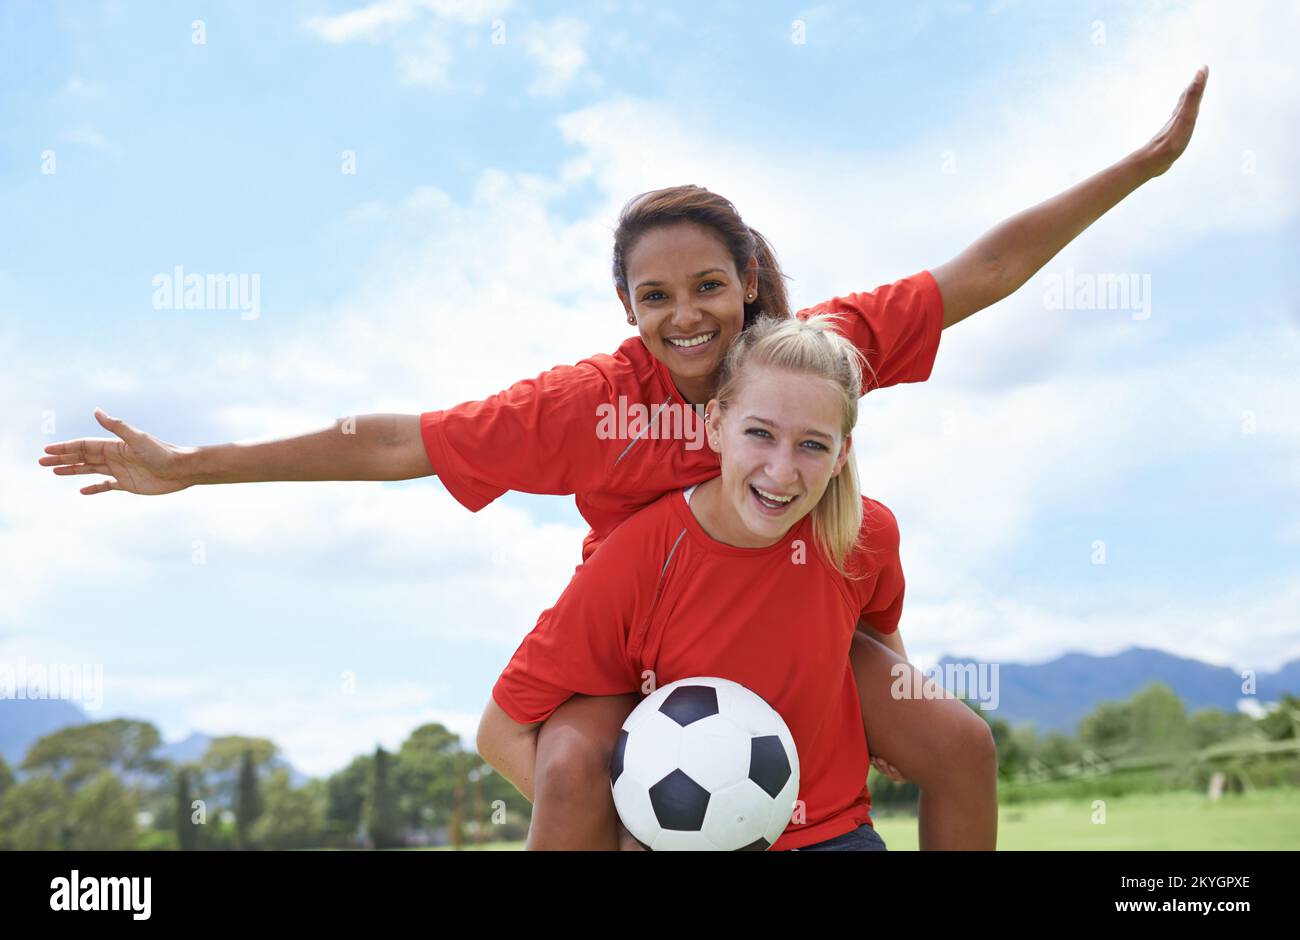 Celebrating a brilliant strike. a female soccer player carrying her teammate on her back in celebration. Stock Photo